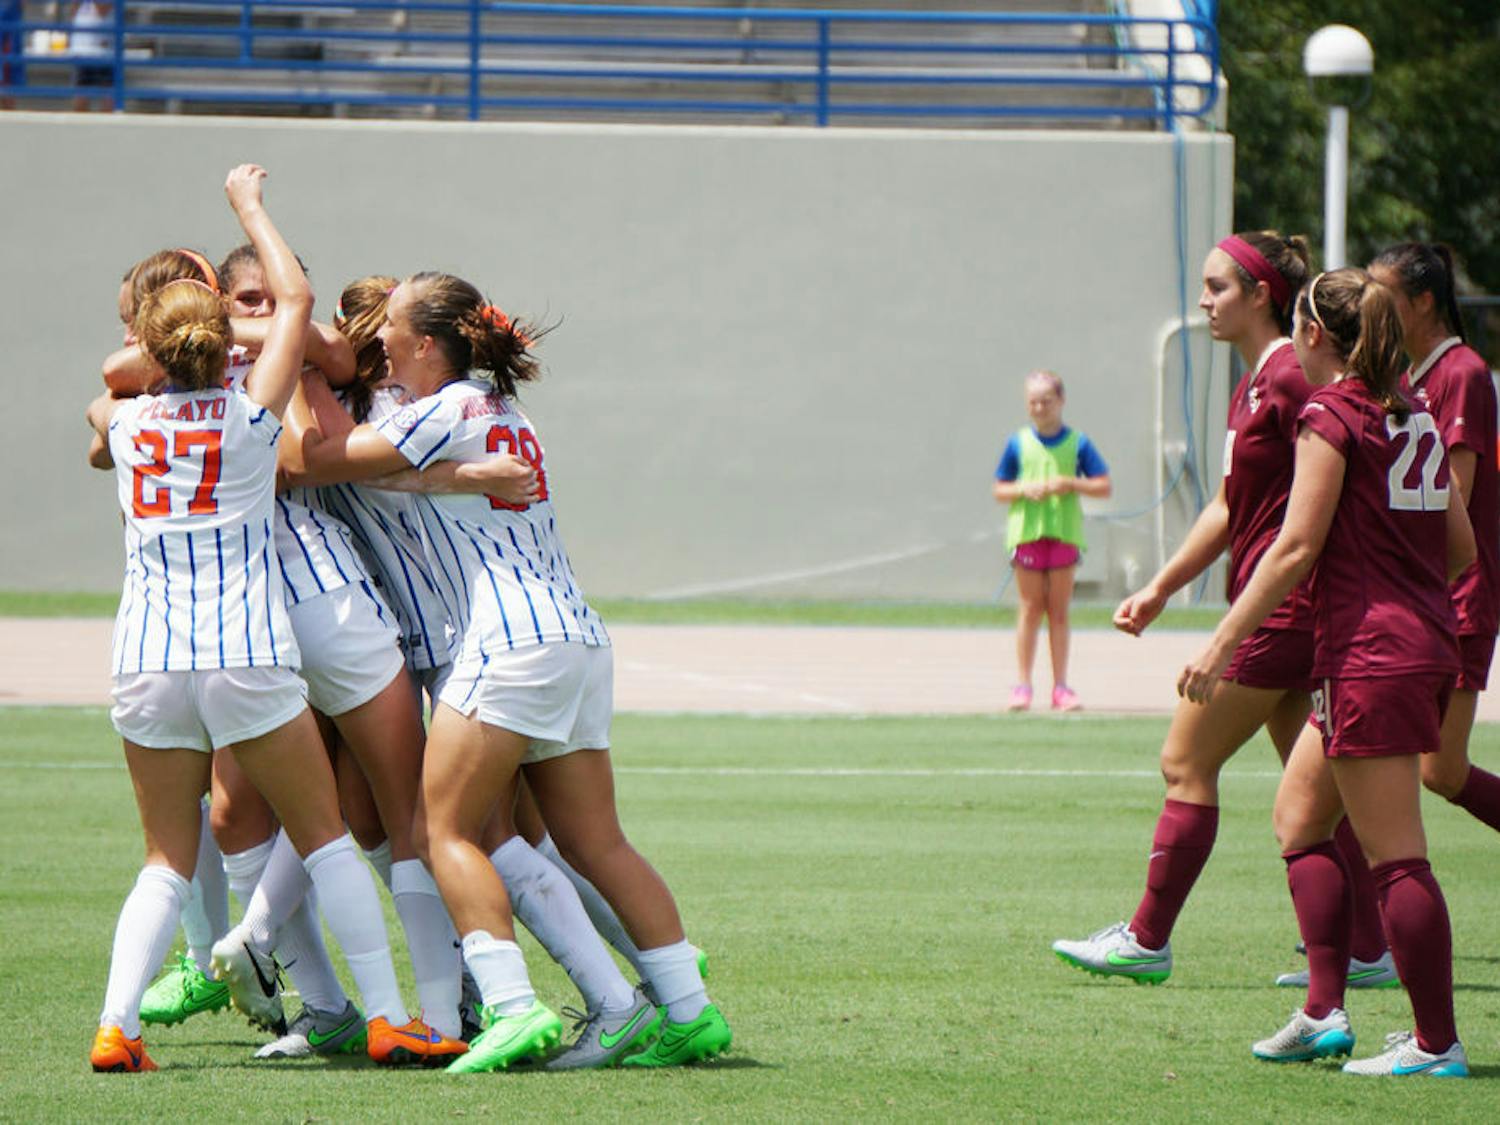 UF soccer players celebrate Sarah Troccoli's goal while FSU players watch on during Florida's 3-2 win on Aug. 30, 2015, at James G. Pressly Stadium.